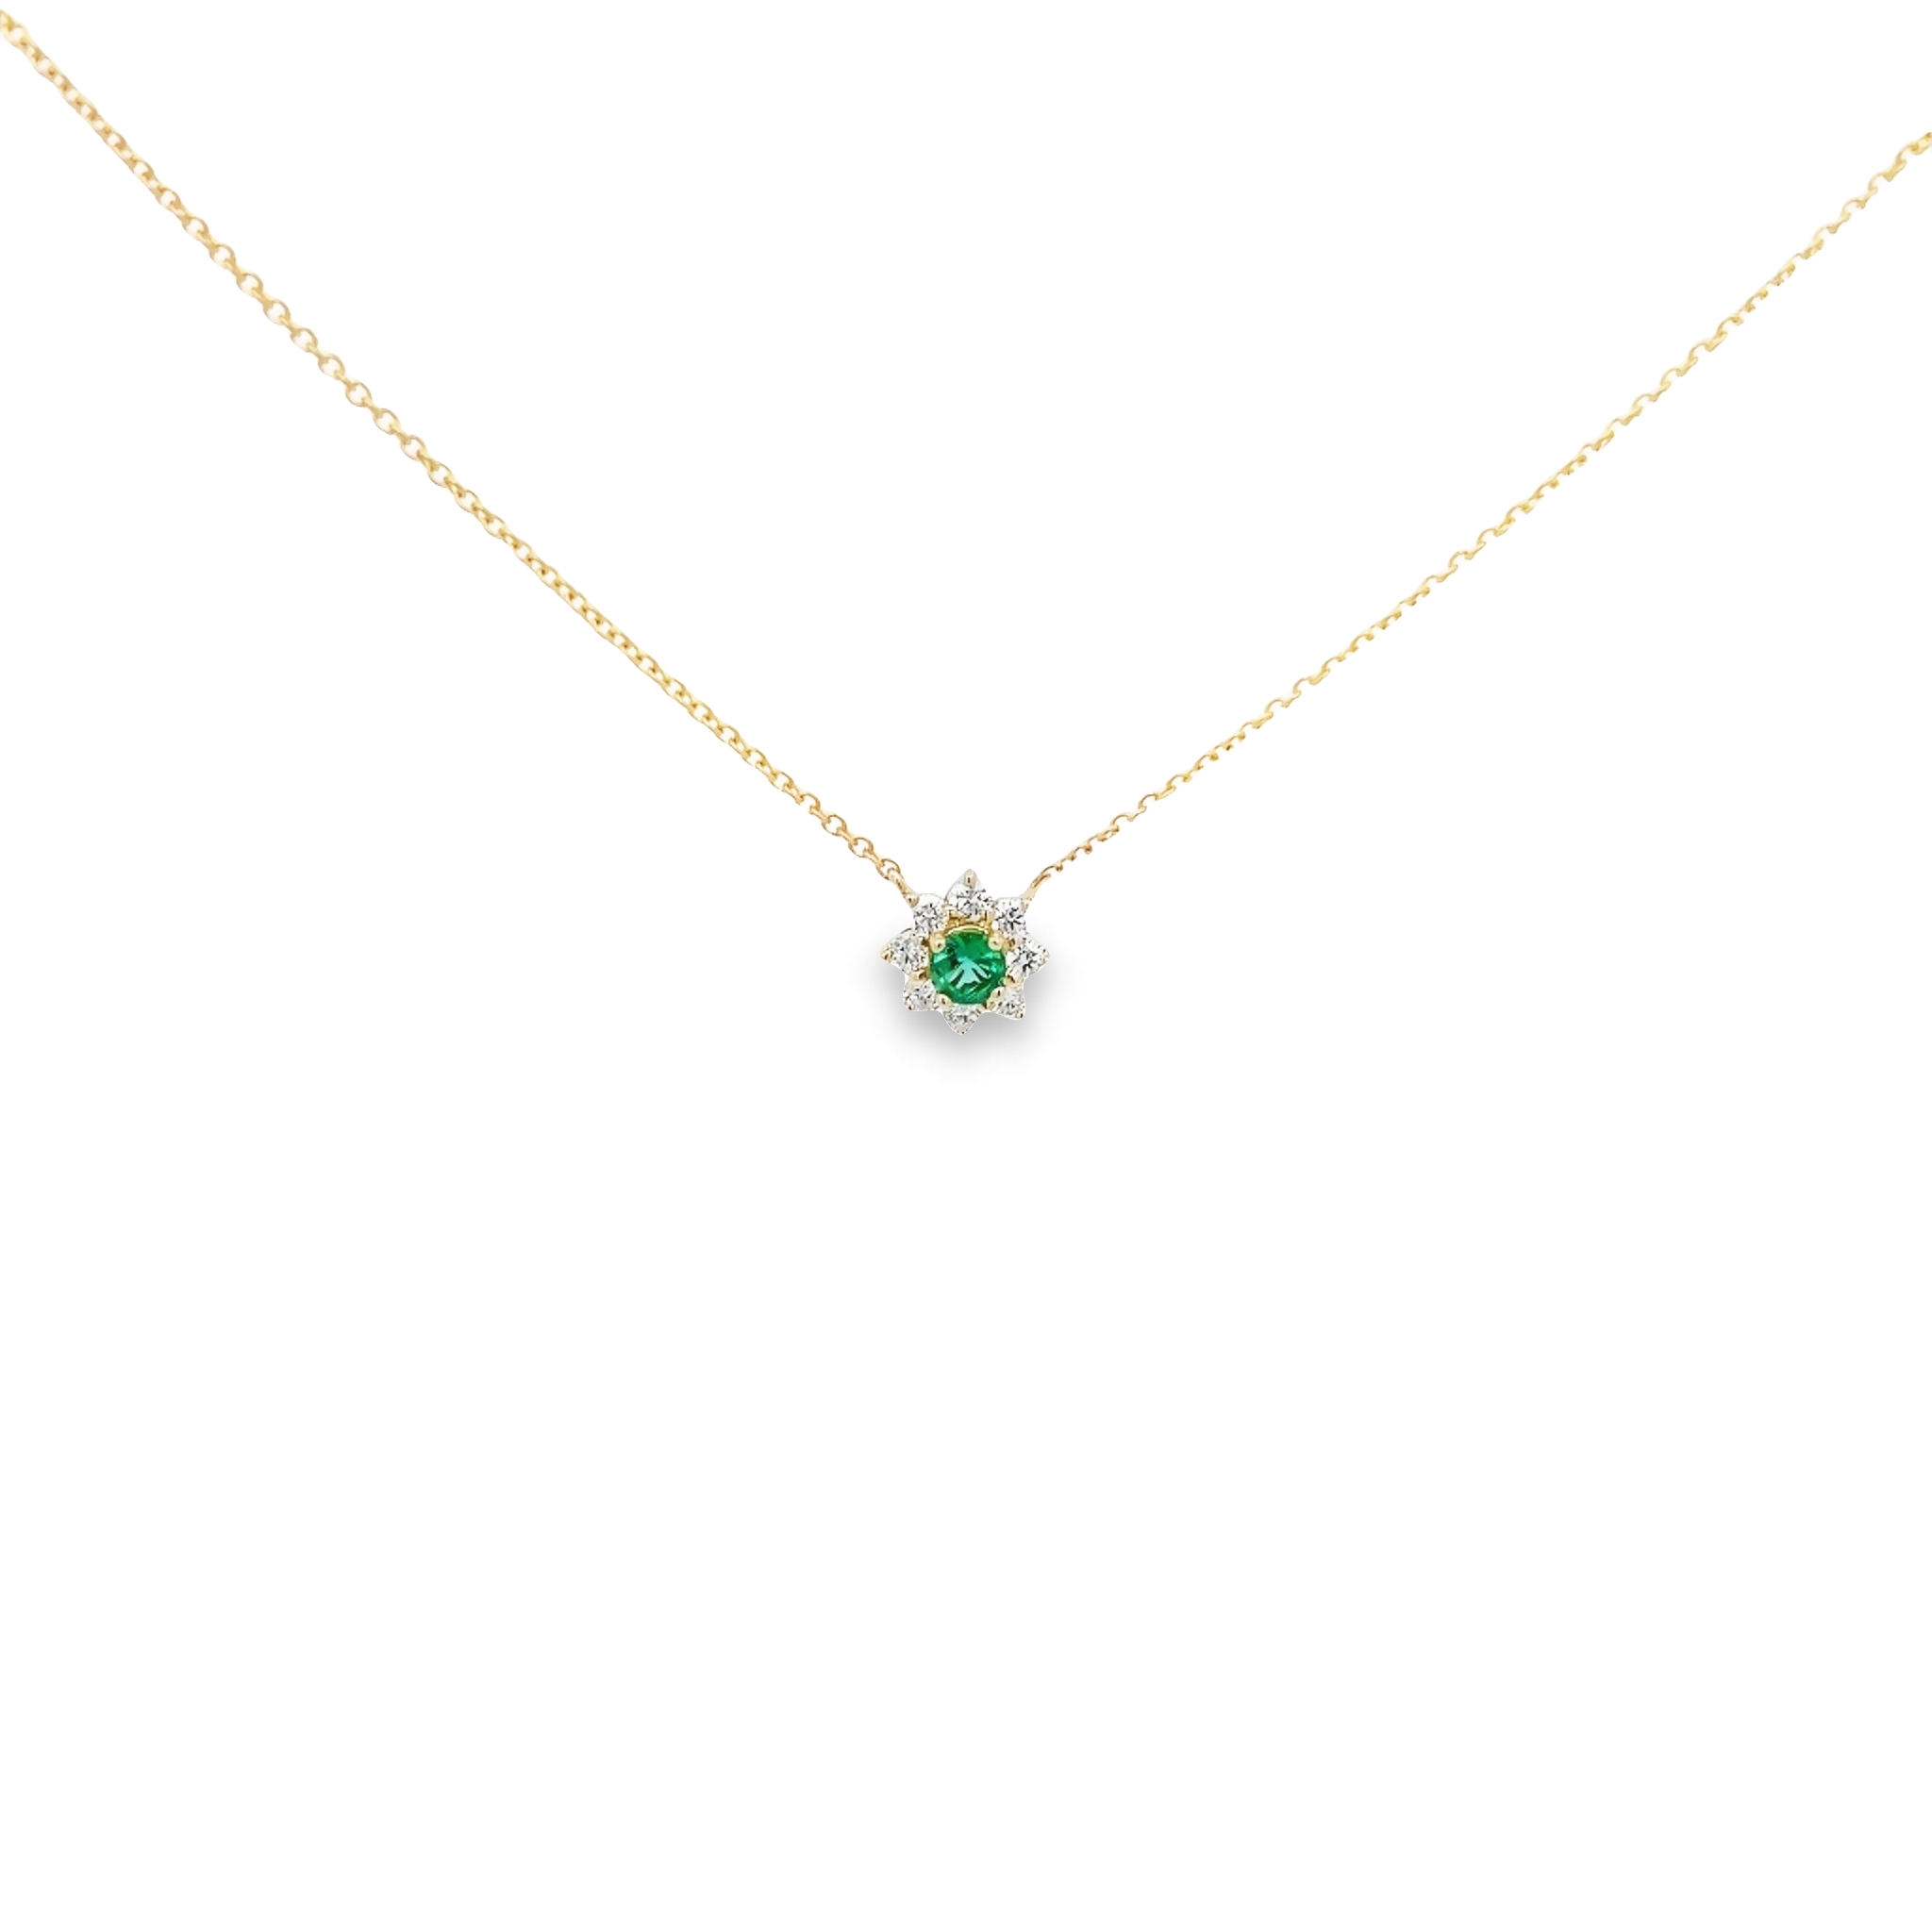 14 Karat yellow gold pendant with One 0.25Ct round mixed cut Emerald and 8=0.37 total weight round brilliant G VS Diamonds